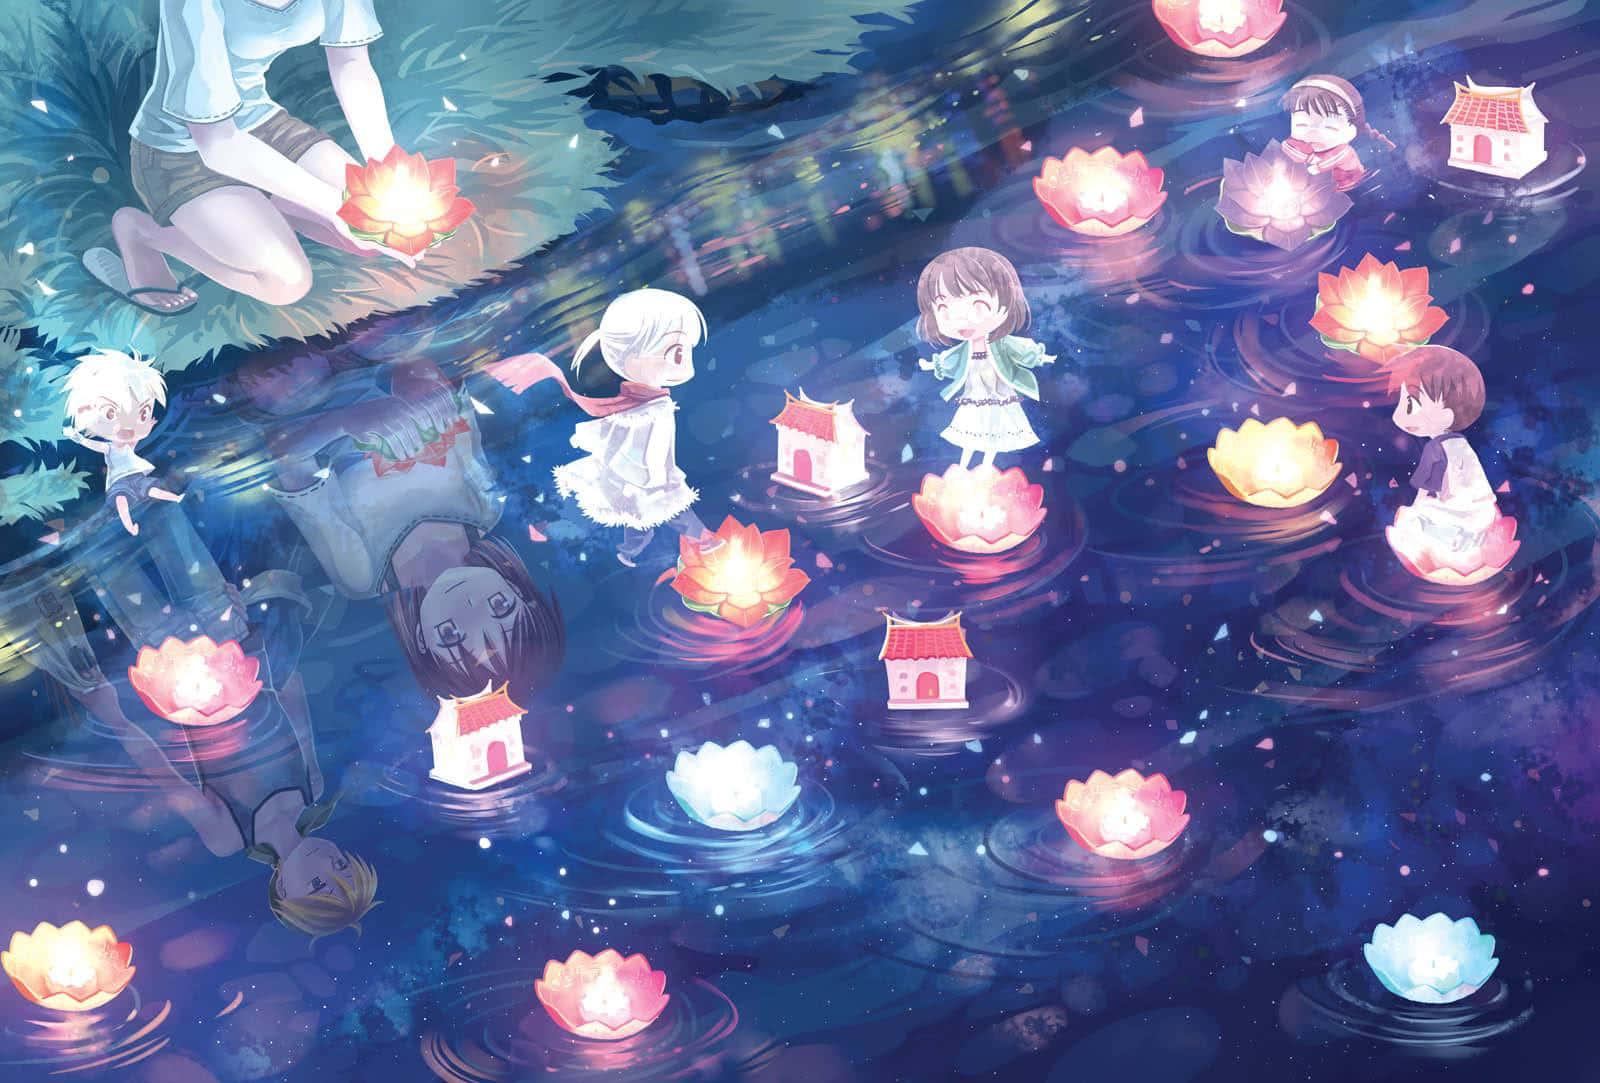 Enchanting Anime Landscape with Magical Floating Islands